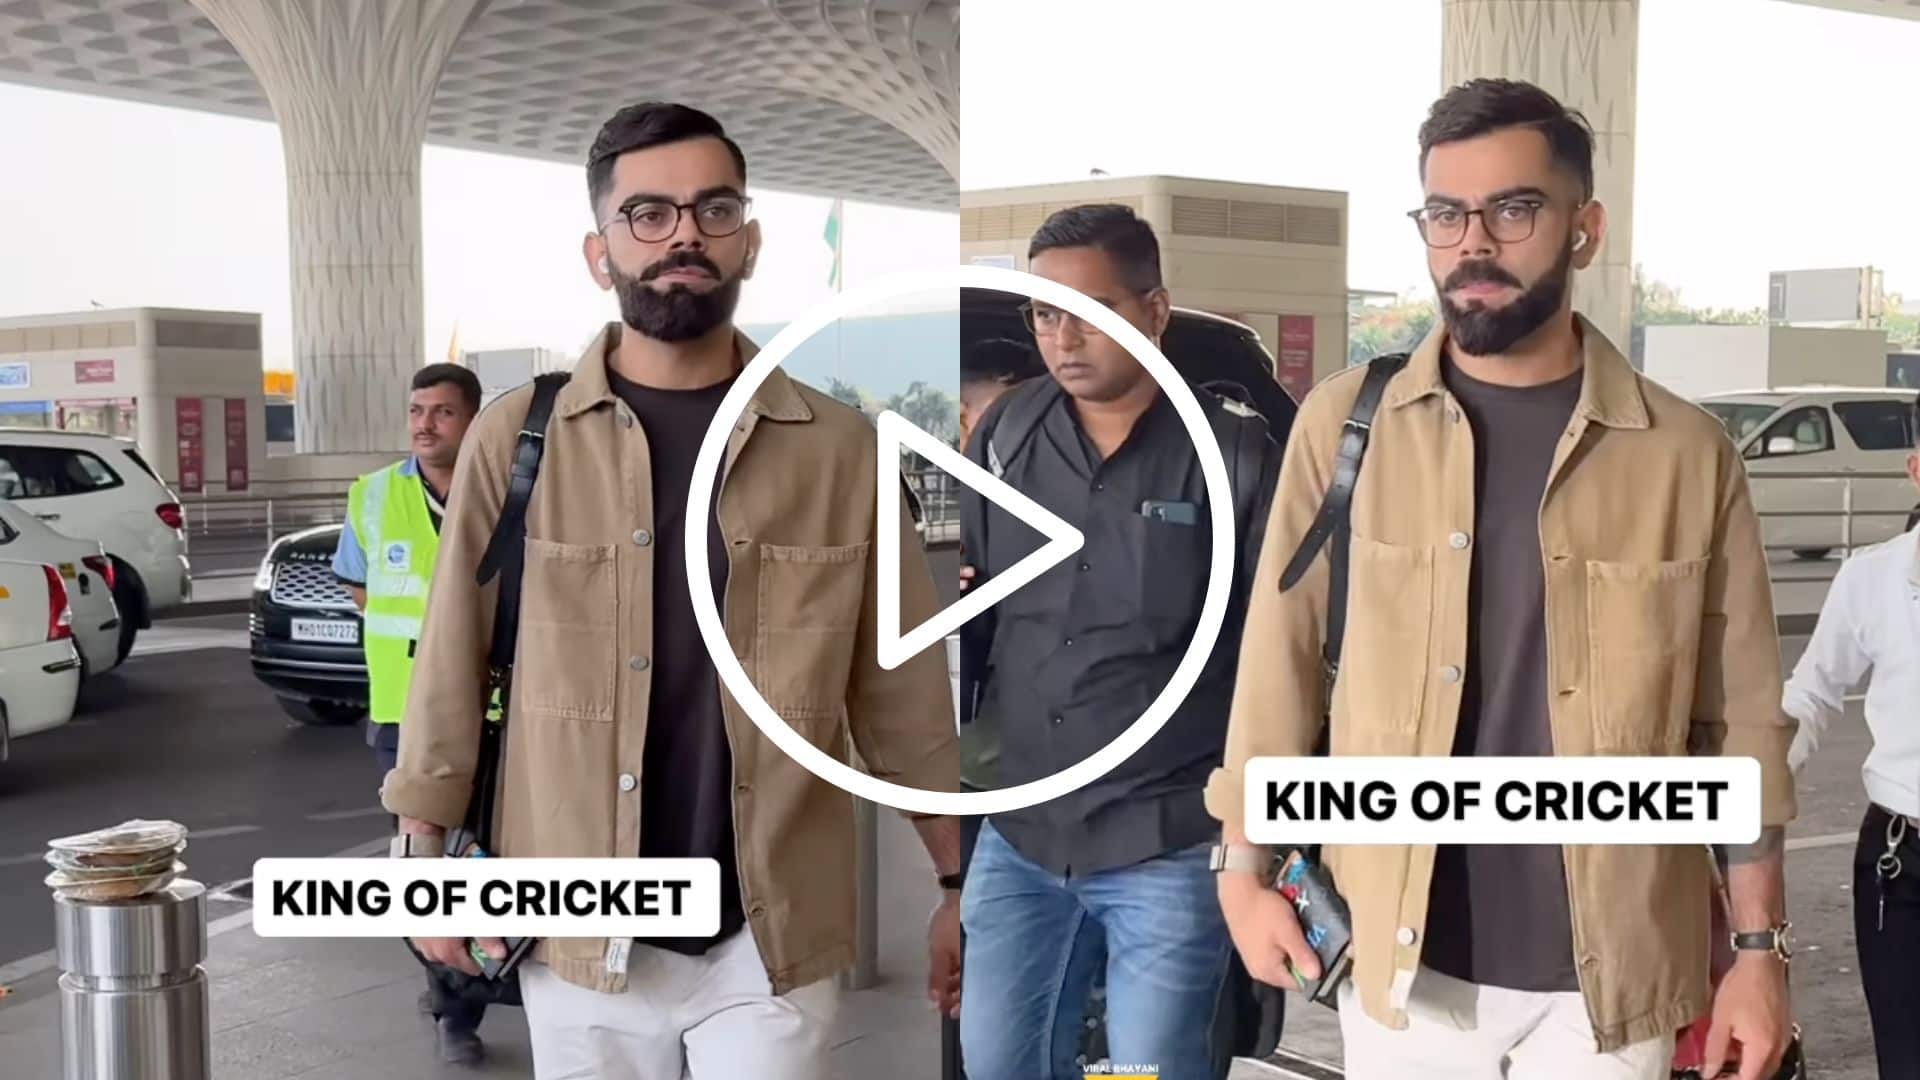 [Watch] Virat Kohli Departs For South Africa For India's Upcoming Test Series